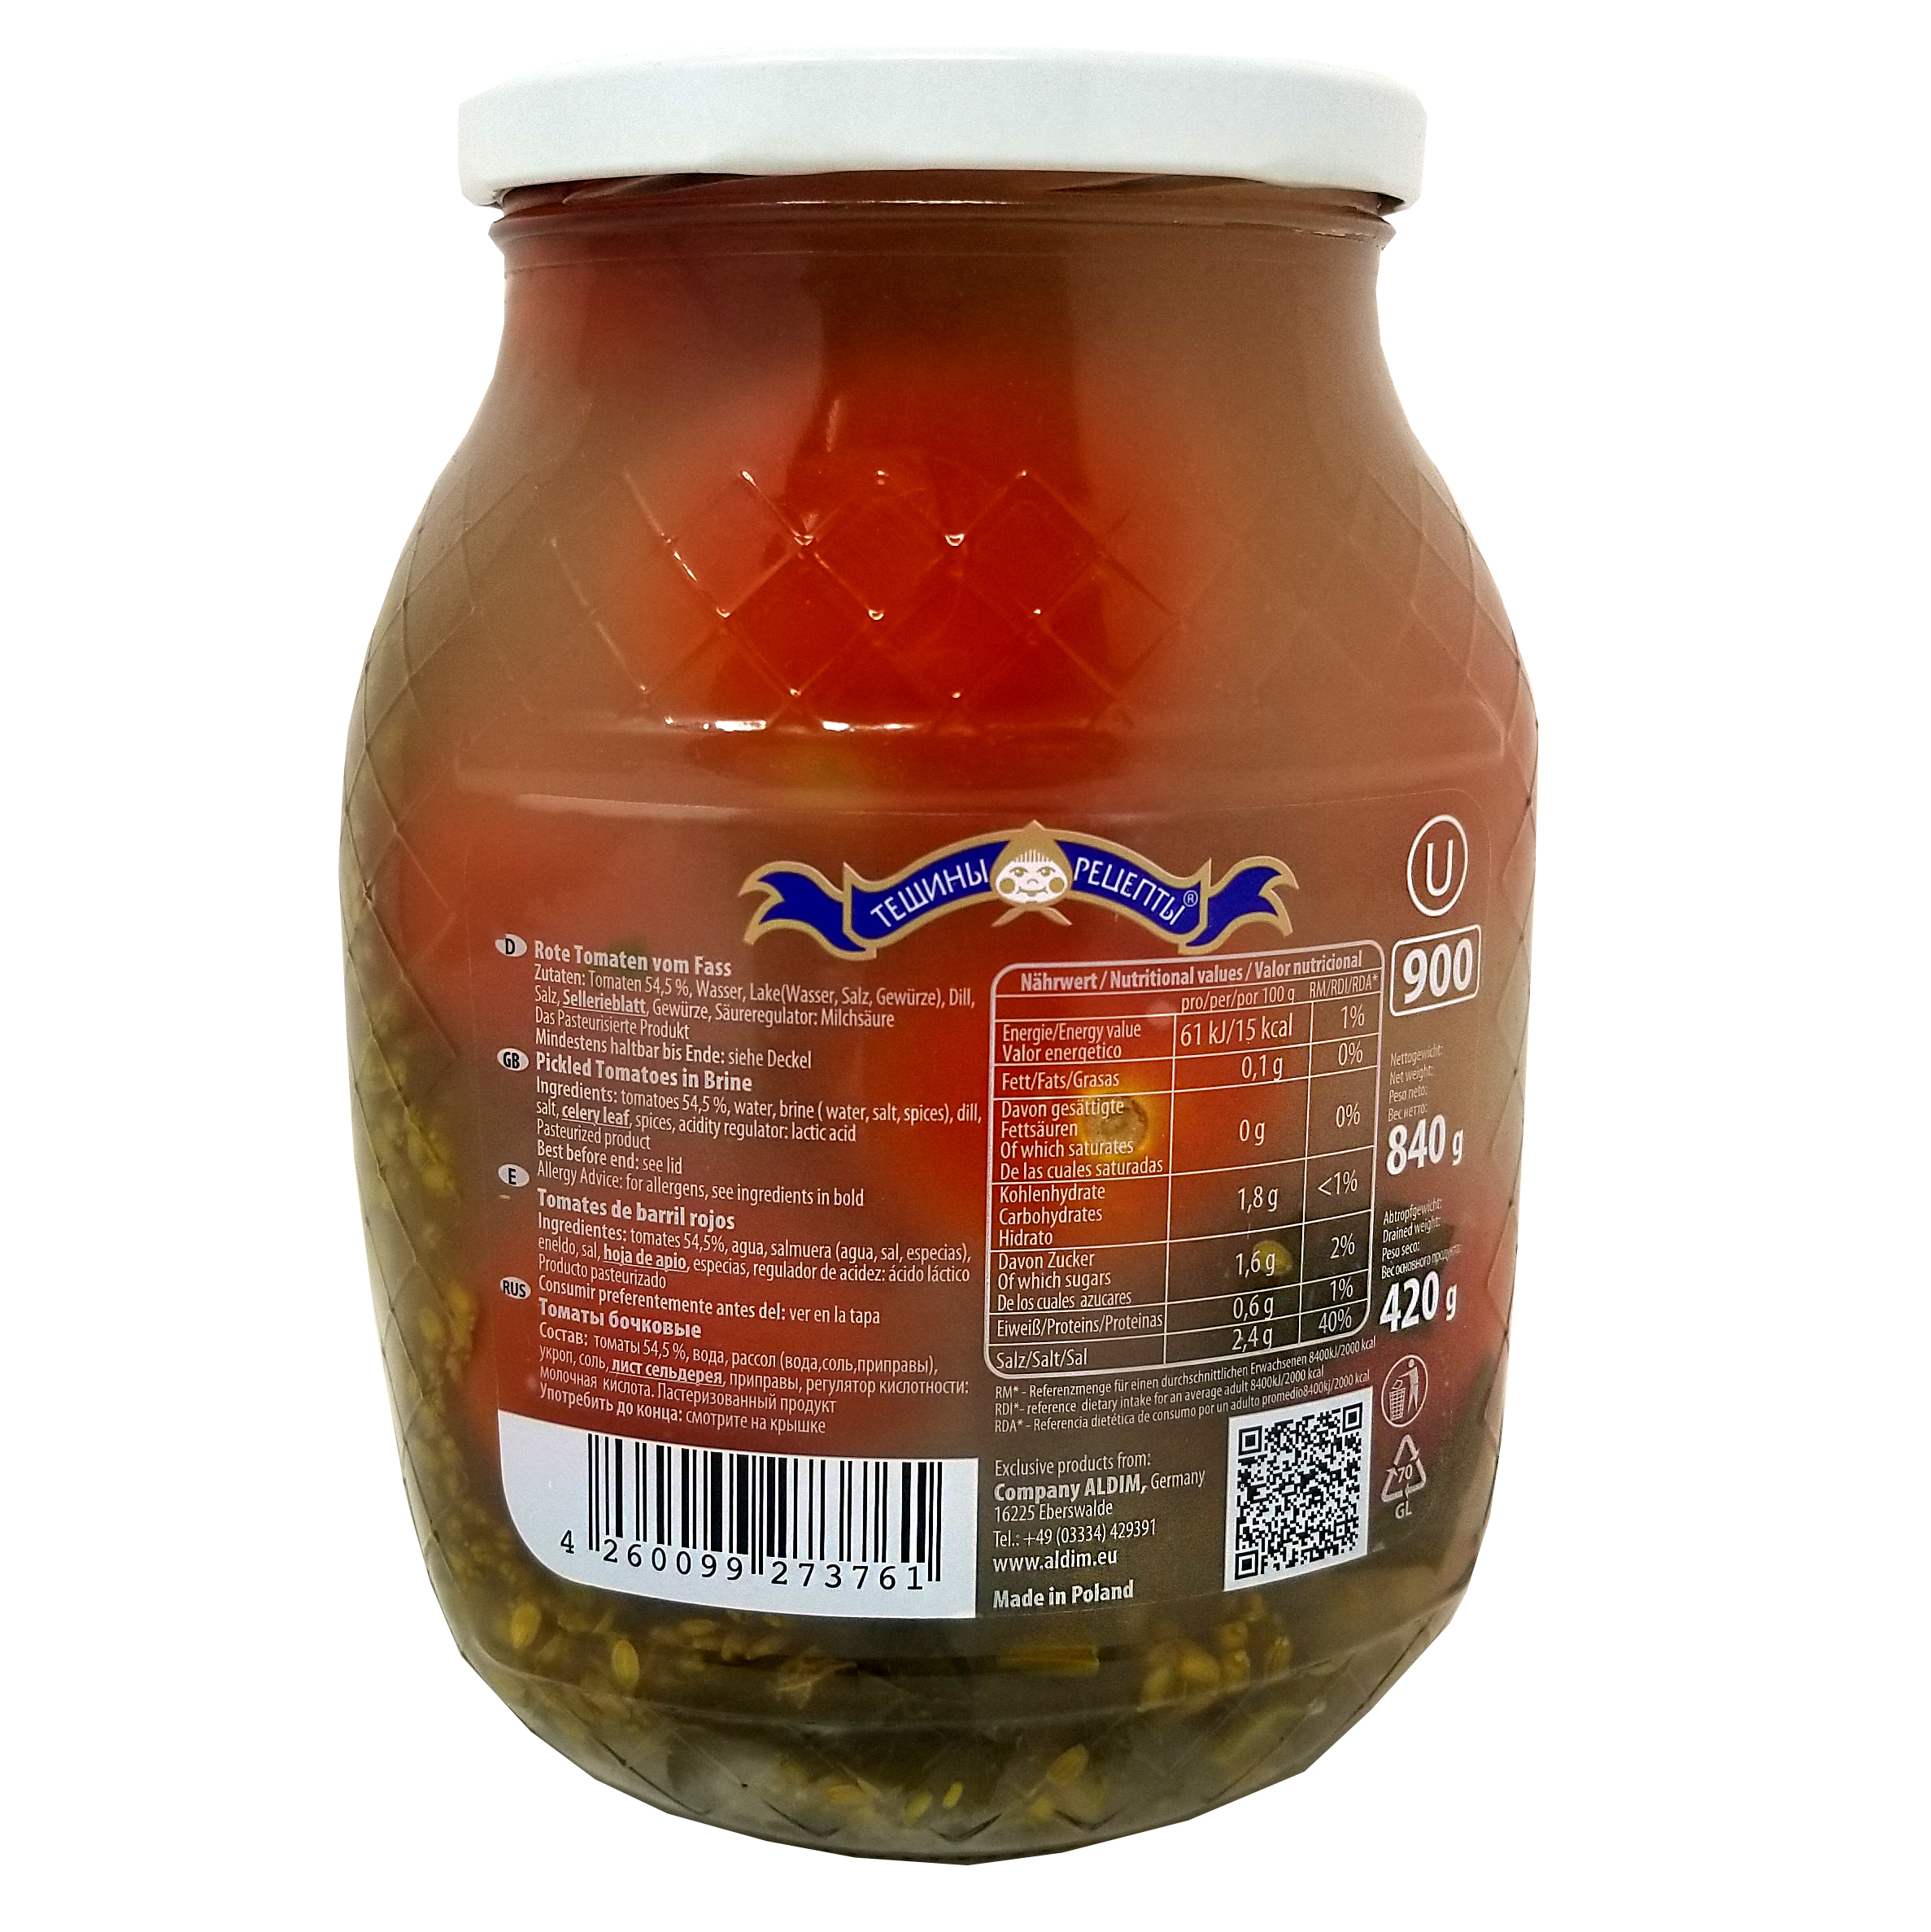 Tomatoes pickled in brine, from Barrel,  Teshcha's Recipes, 900g 